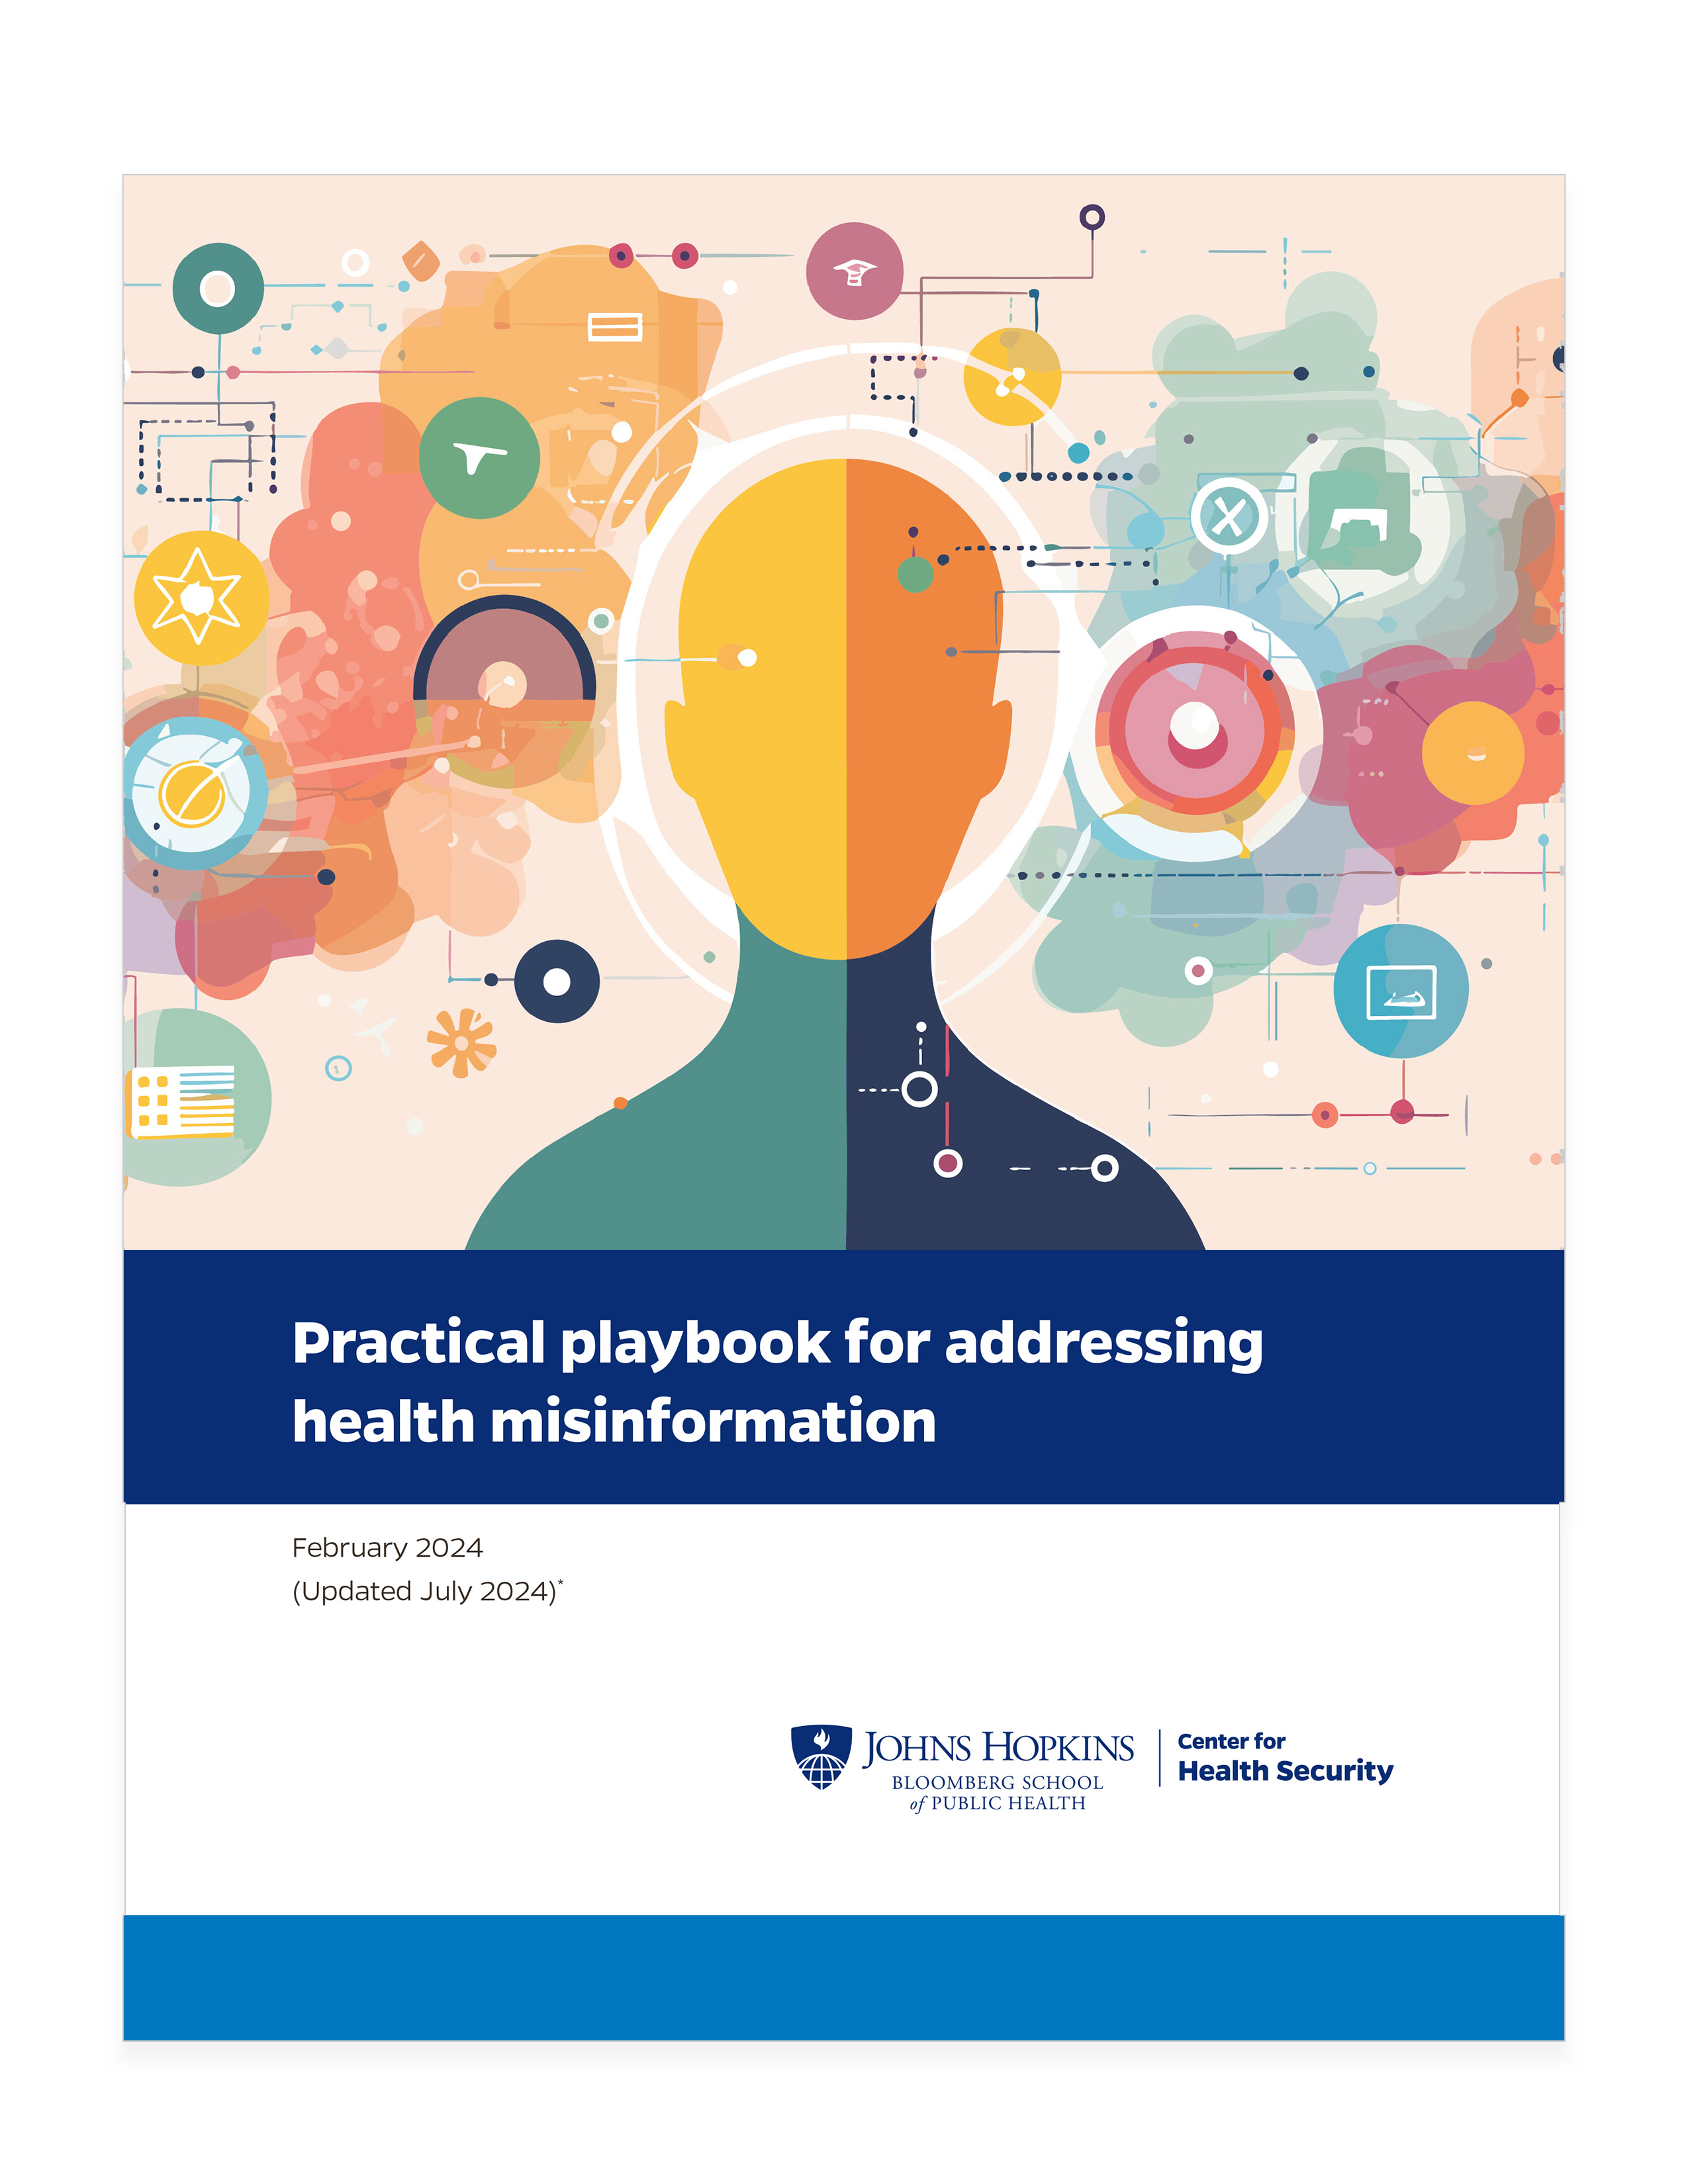 Practical playbook for addressing health misinformation, version 2